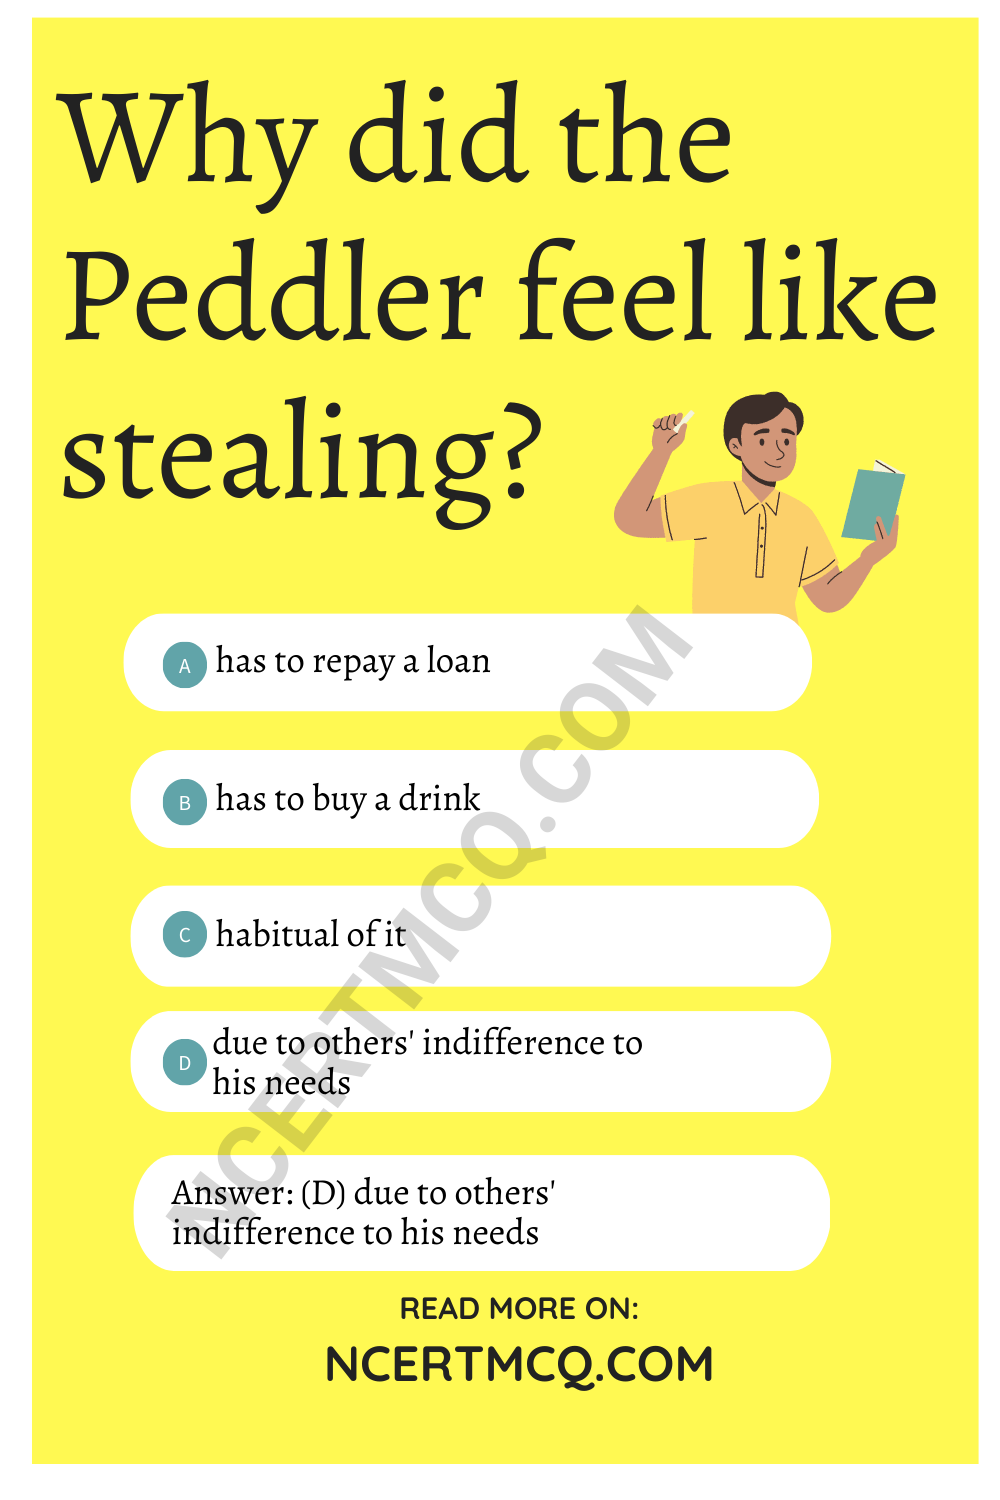 Why did the Peddler feel like stealing?